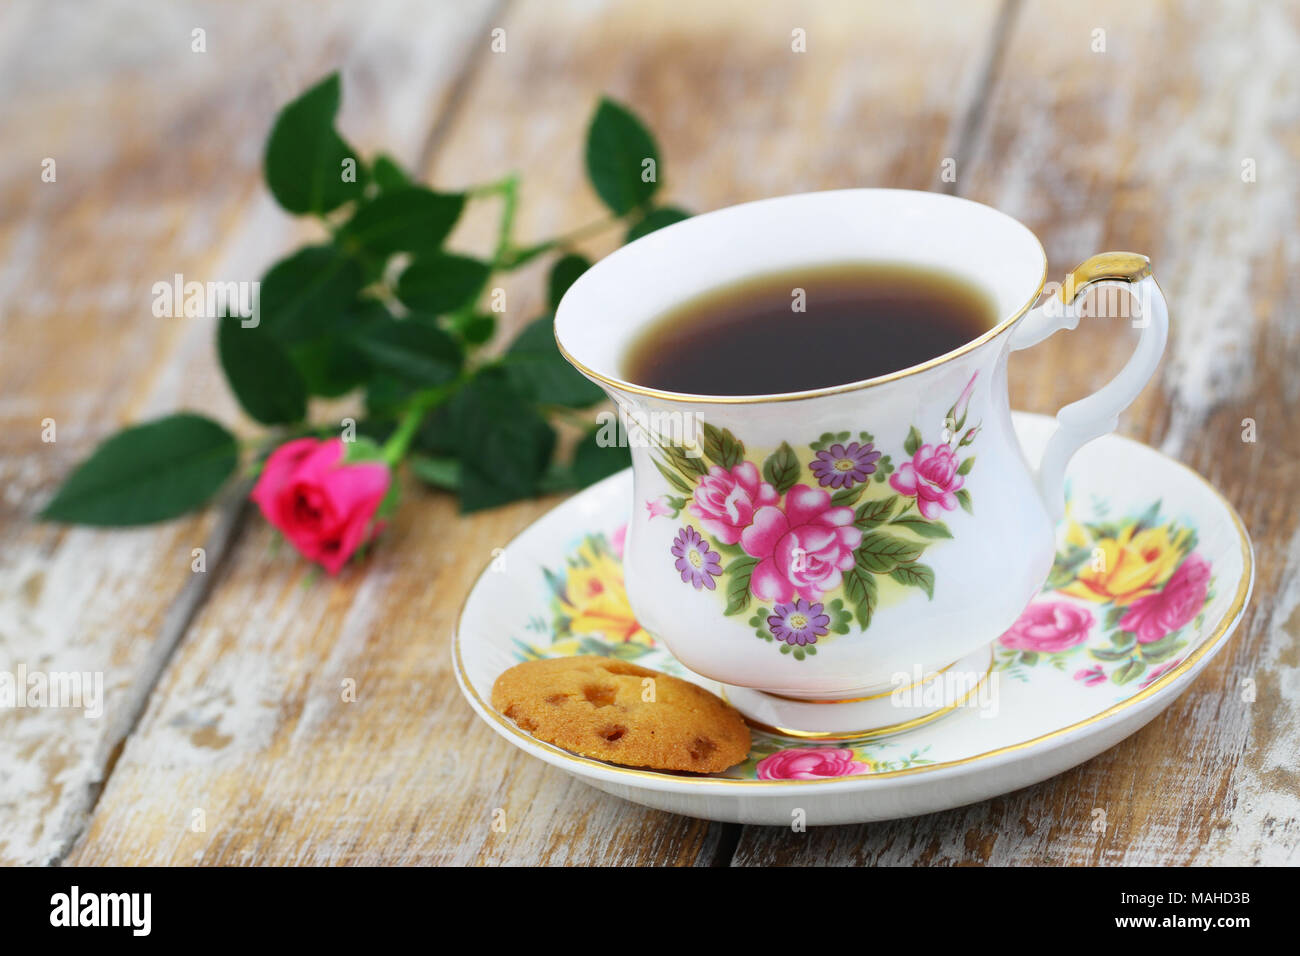 Tea in vintage porcelain cup, crunchy cookie and pink wild rose on rustic wooden surface Stock Photo